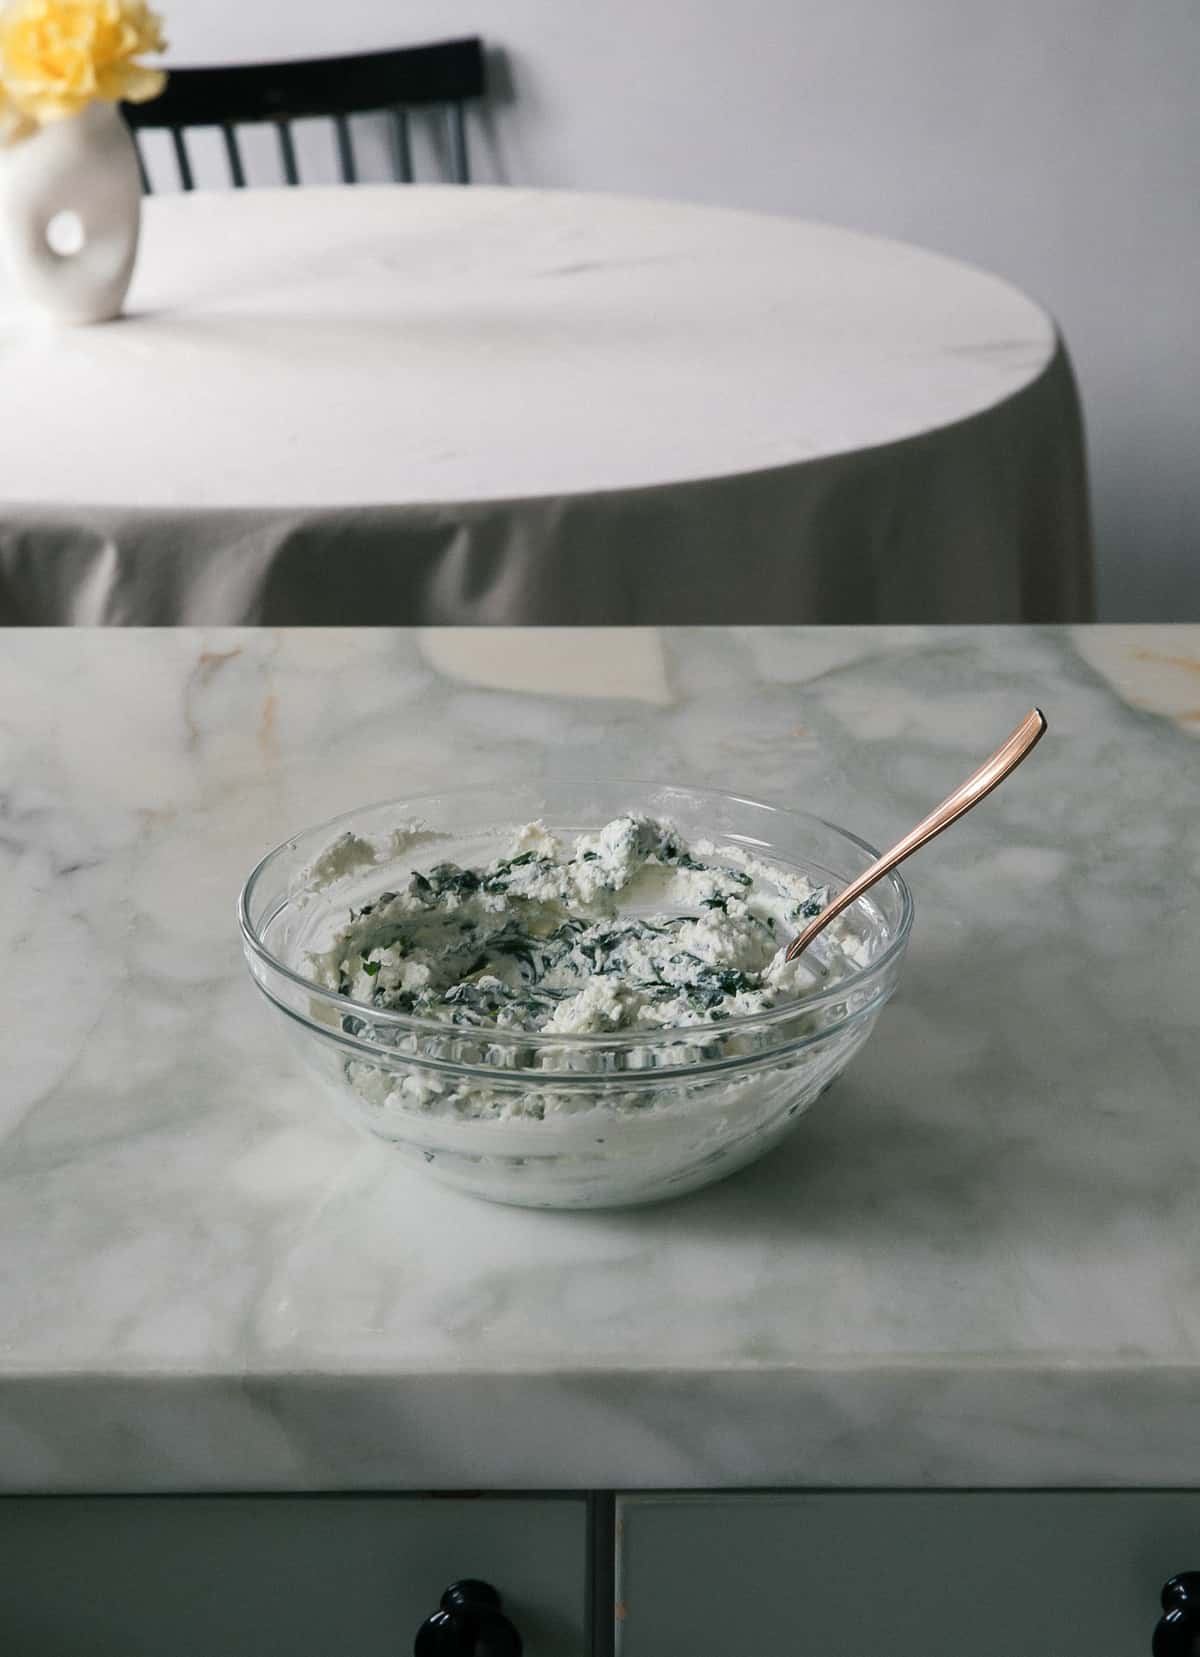 Spinach being mixed with ricotta